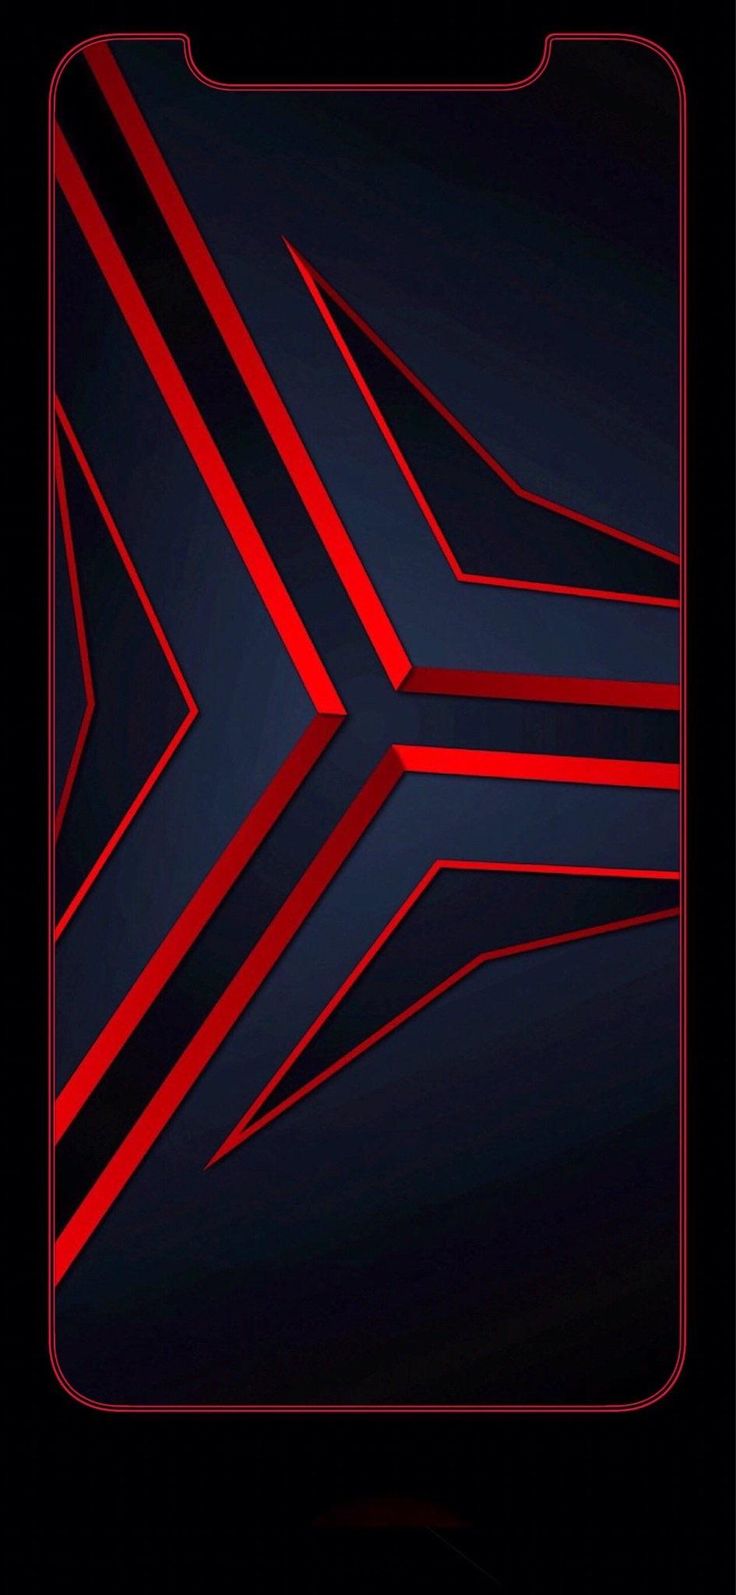 Amazing iphone xr wallpaper in iphone wallpaper images iphone wallpaper iphone red wallpaper